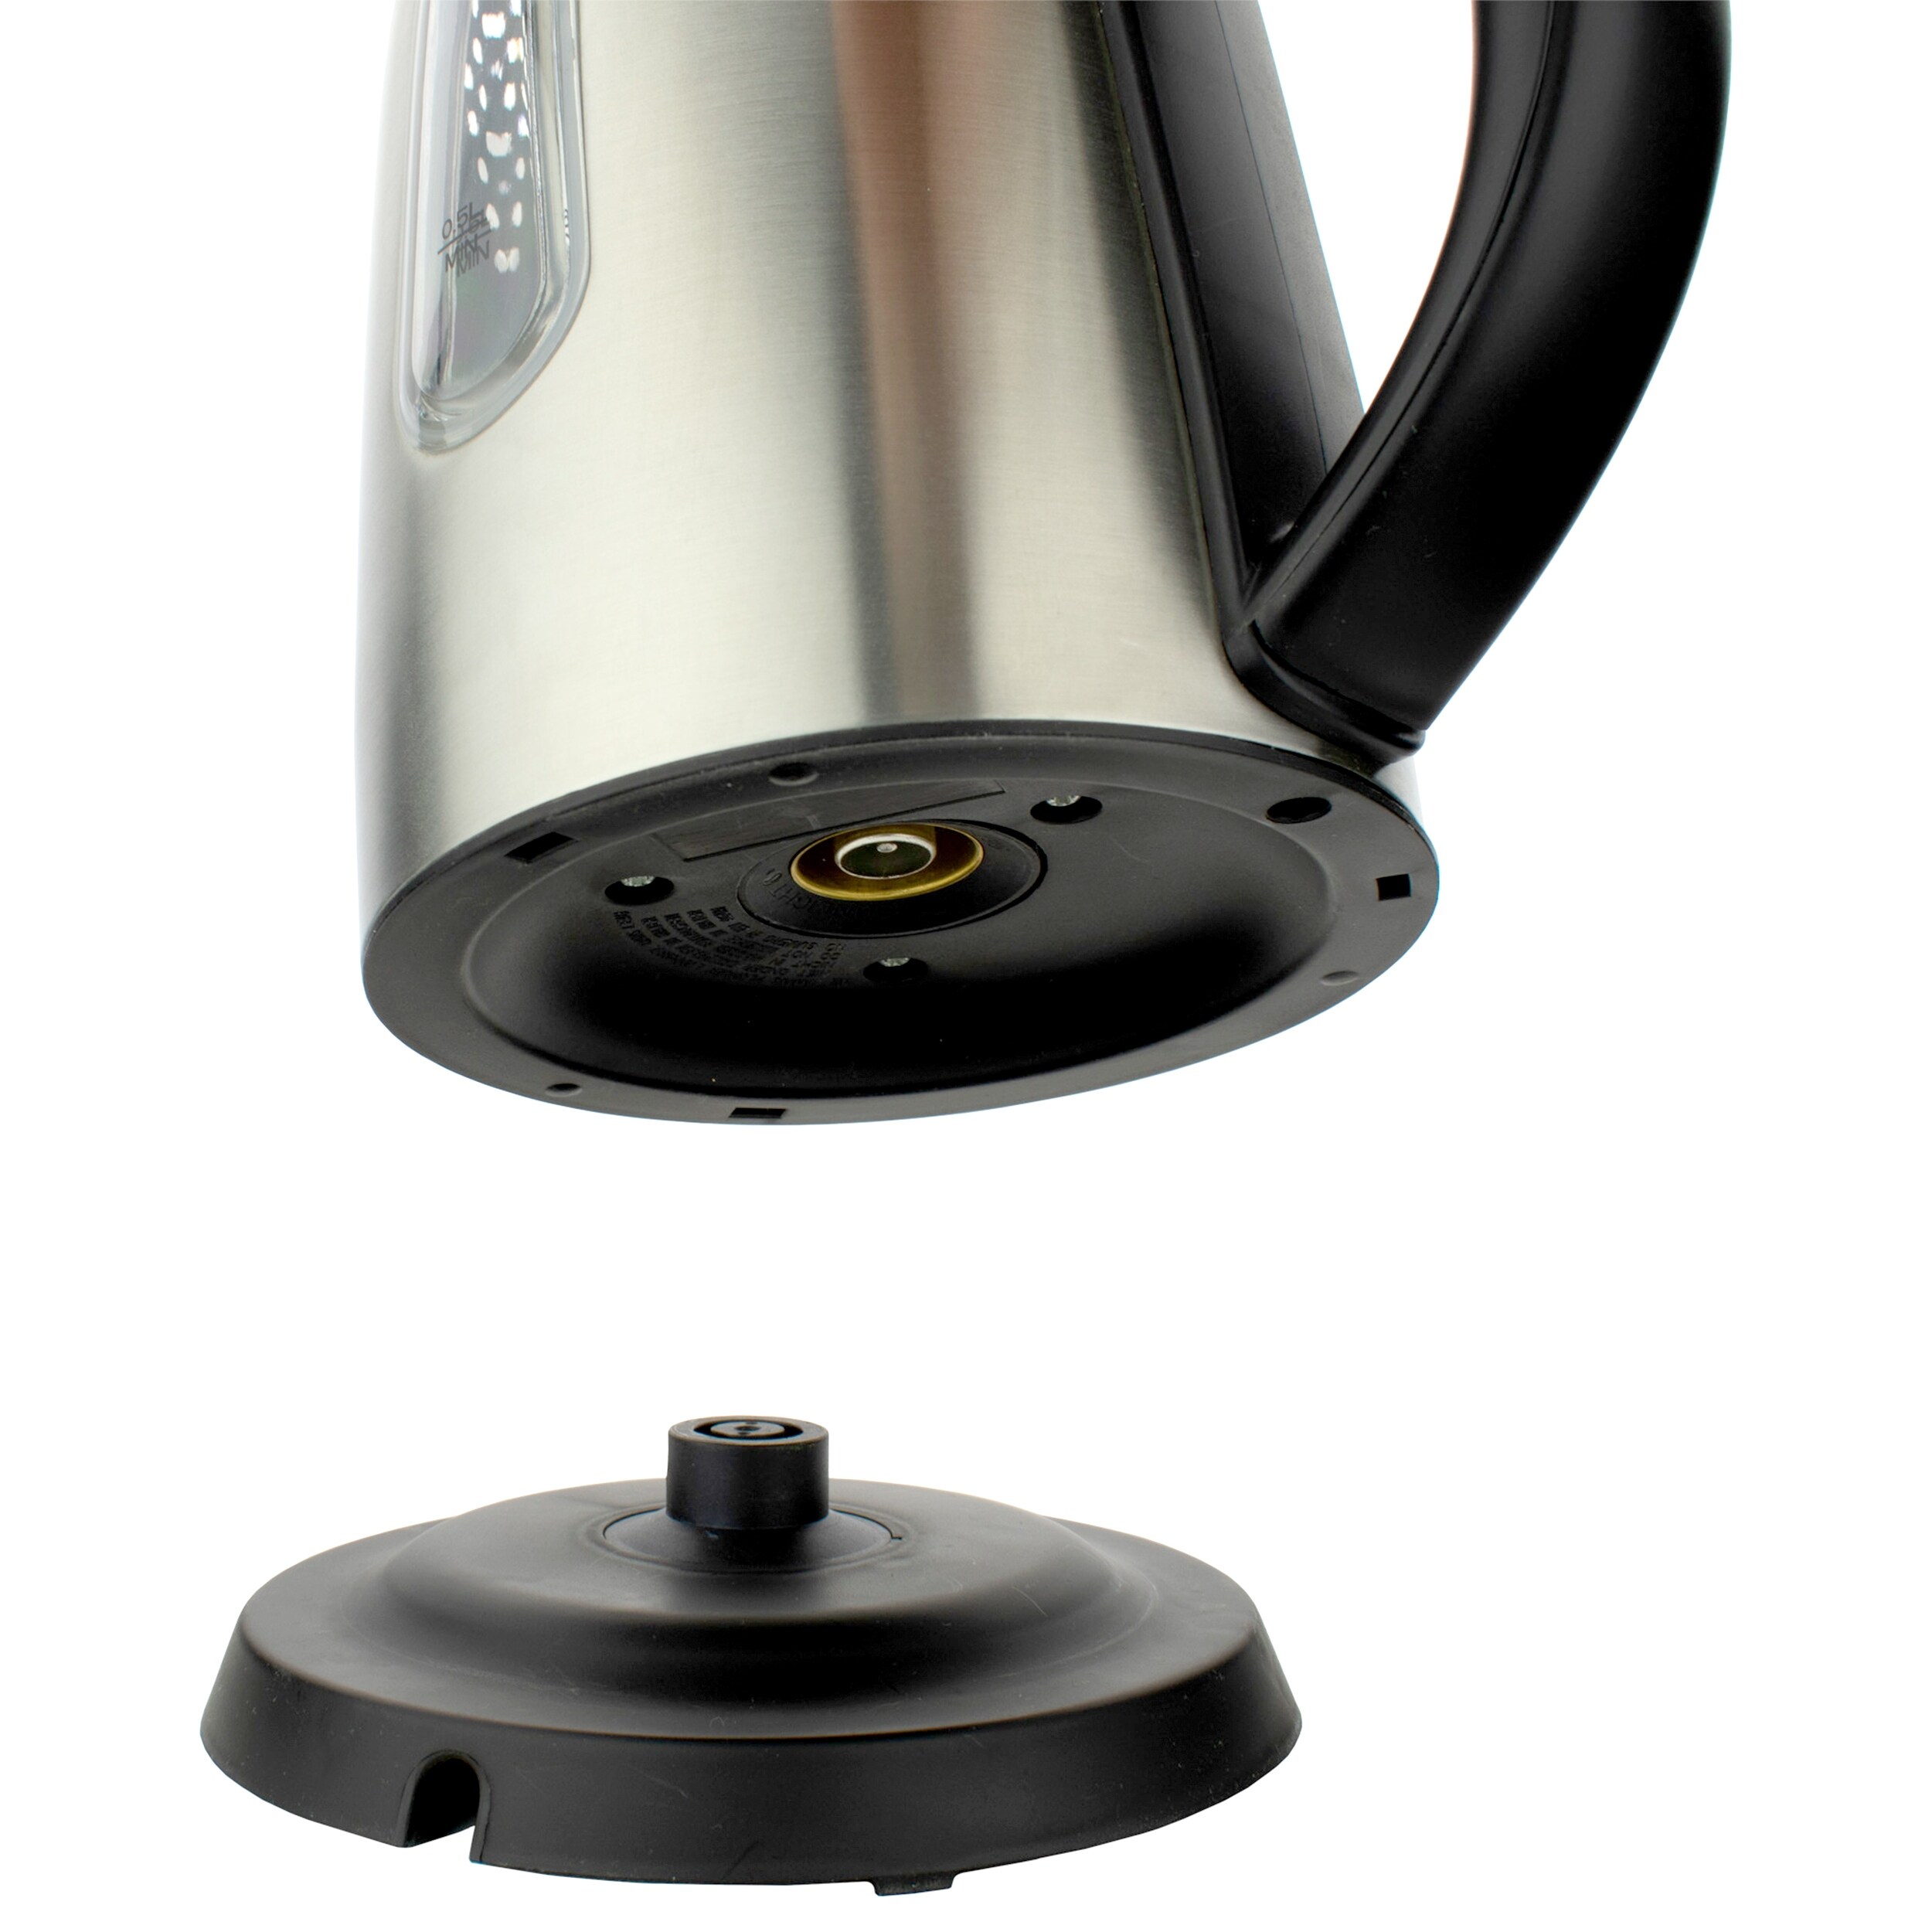 https://ak1.ostkcdn.com/images/products/is/images/direct/c886791c8799bb0b985f80e31dec83f3d36c1248/Brentwood-1-Liter-Stainless-Steel-Cordless-Electric-Kettle.jpg